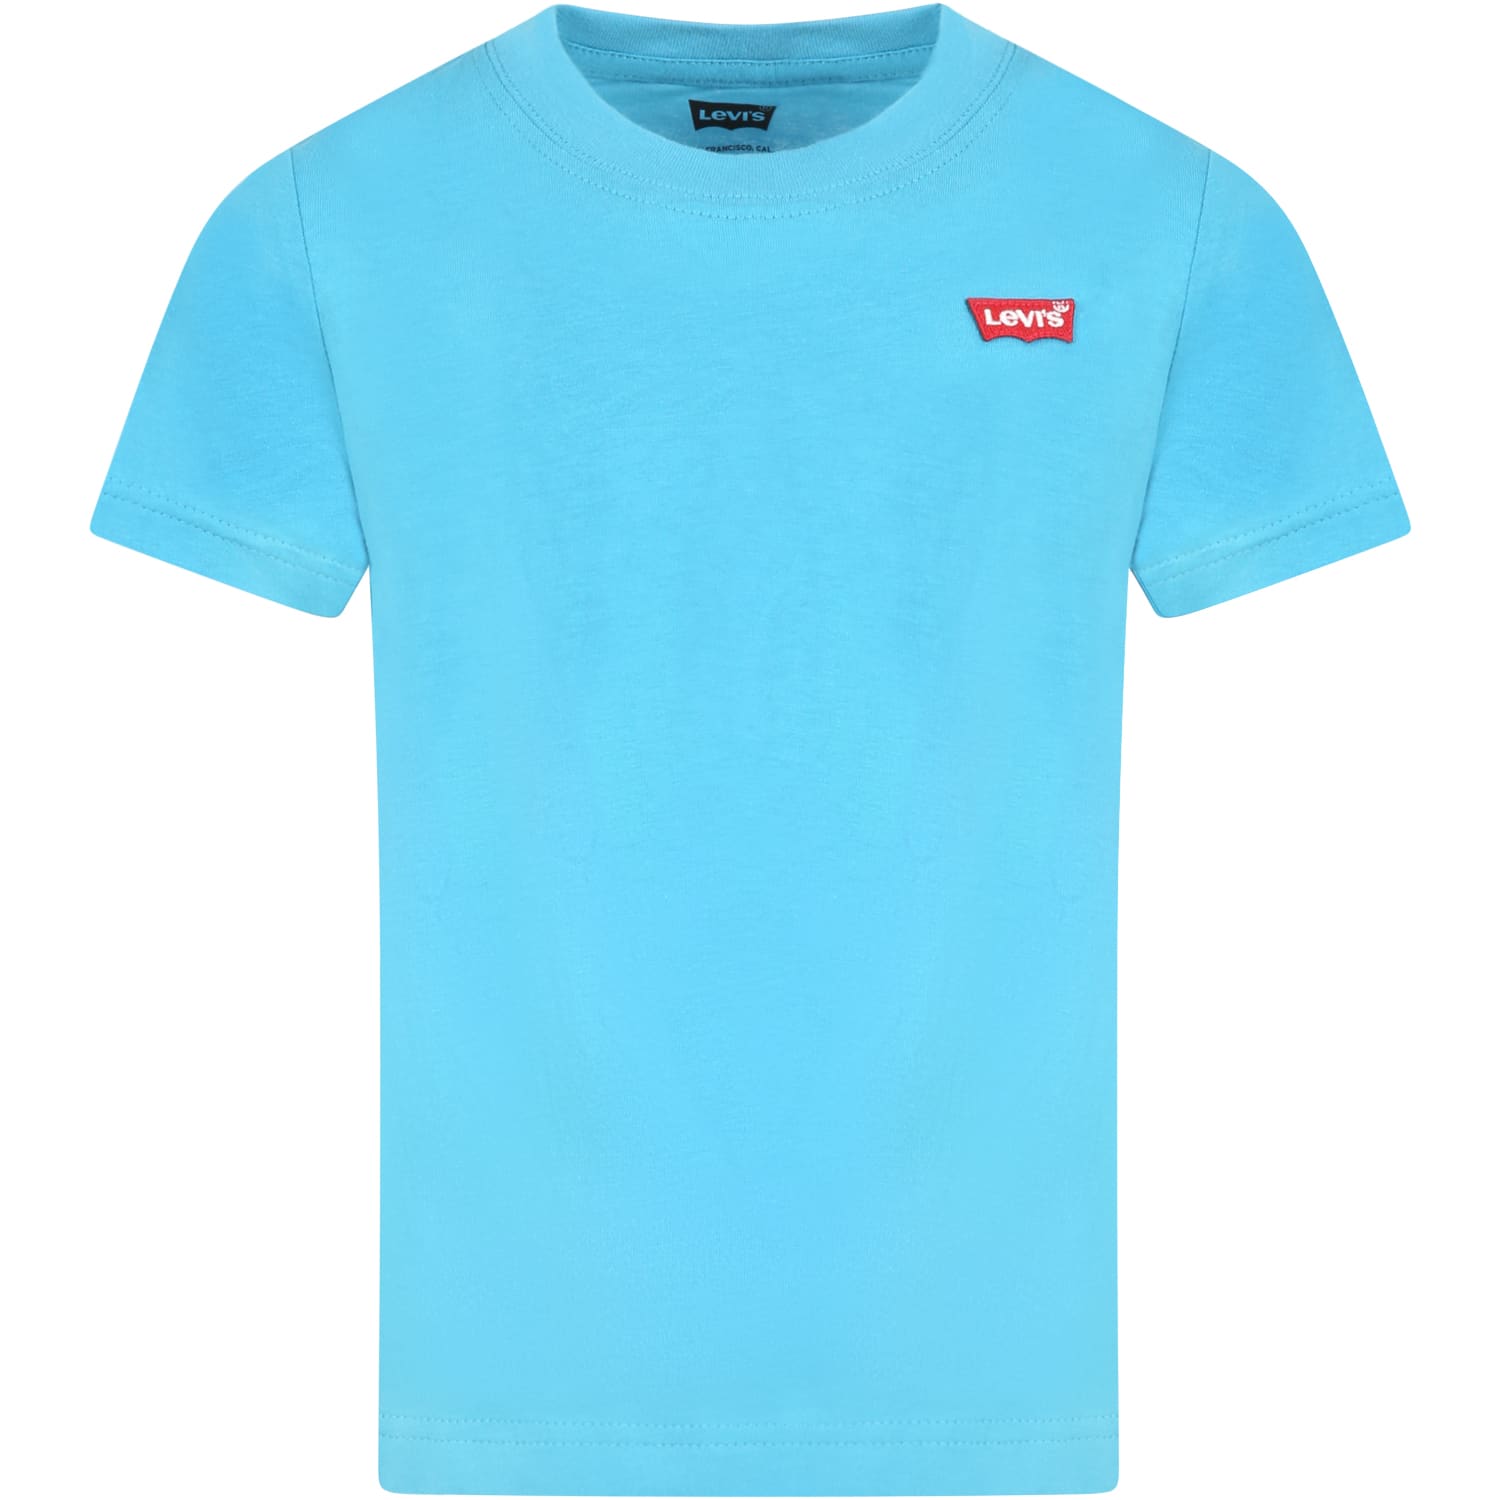 Levis Light Blue T-shirt For Kids With Logo